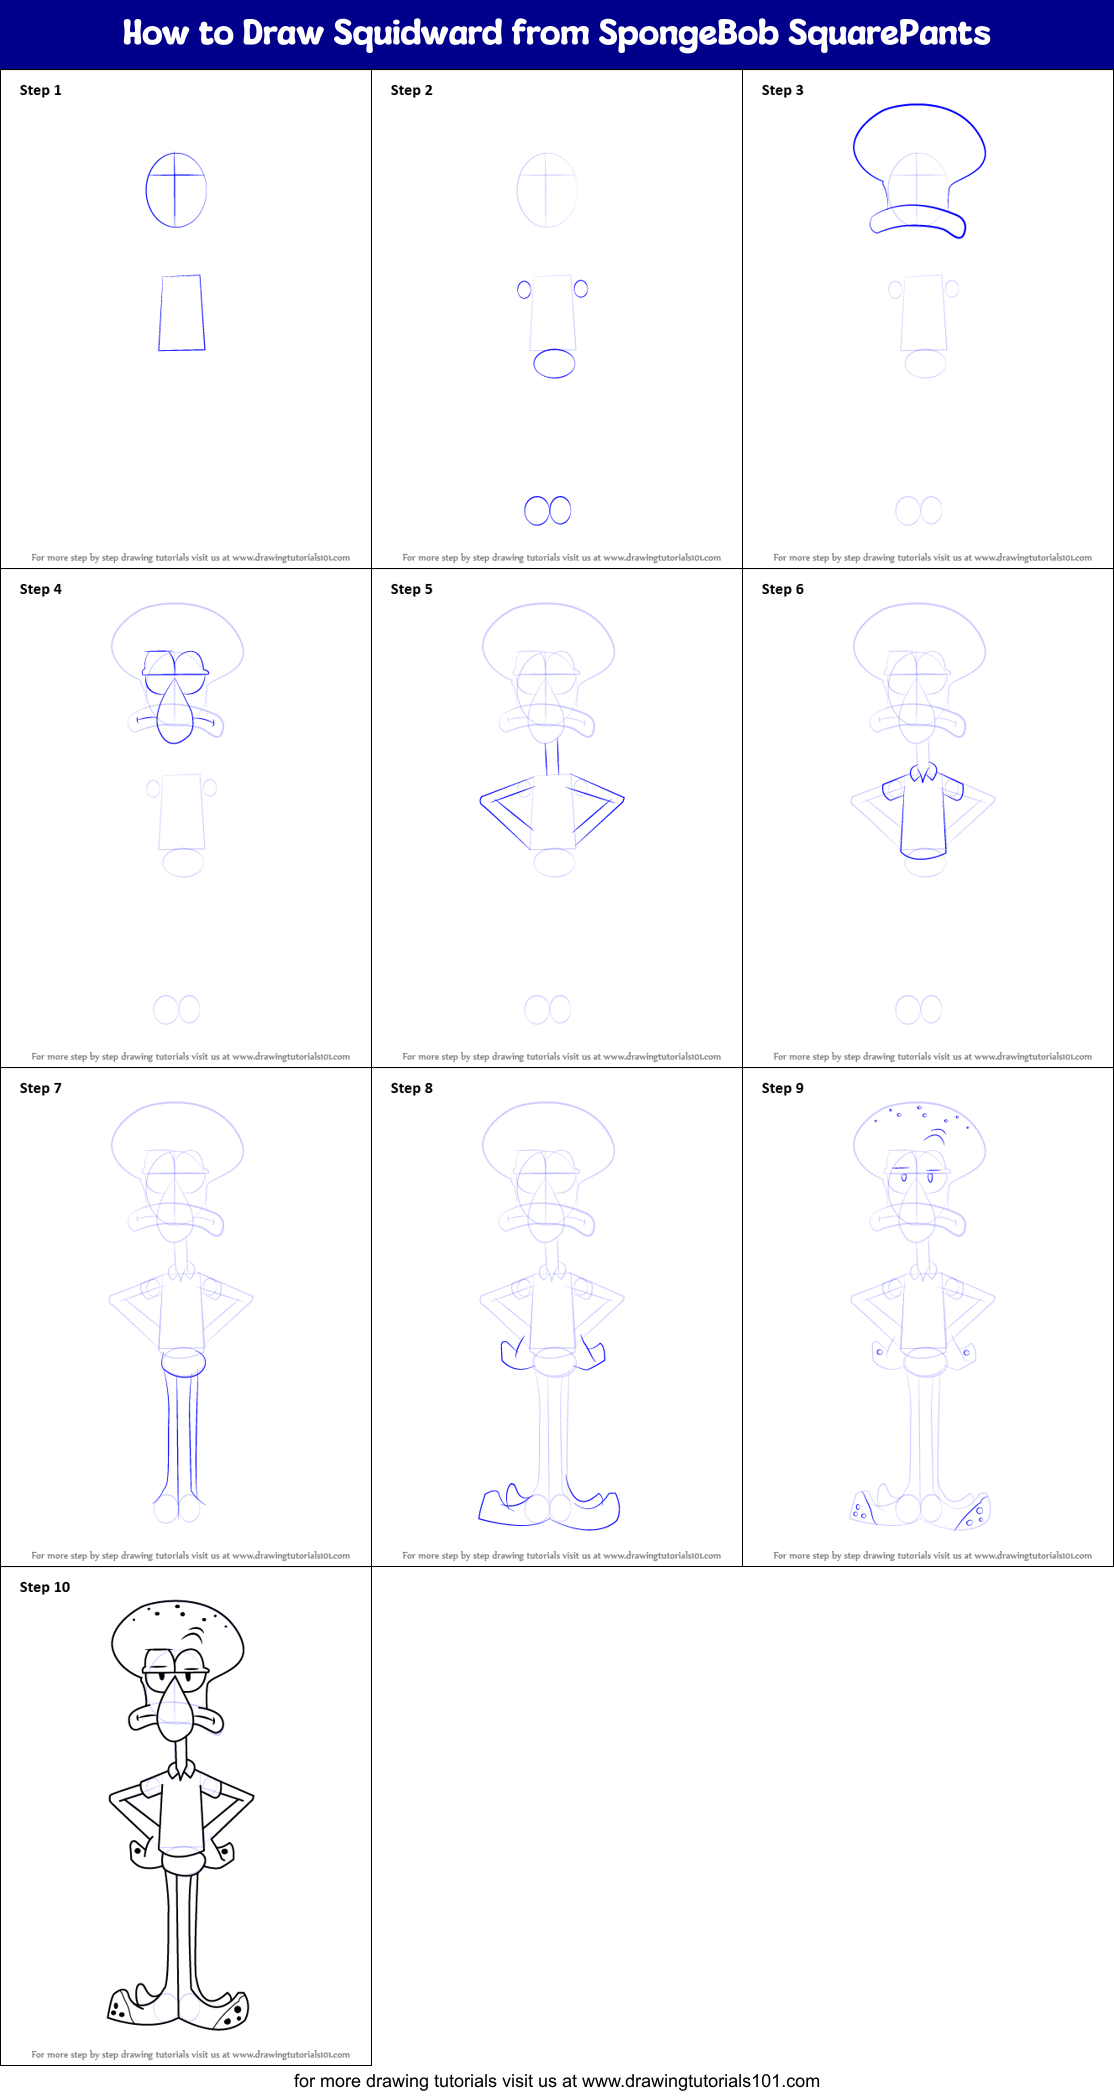 How to Draw Squidward from SpongeBob SquarePants printable step by step